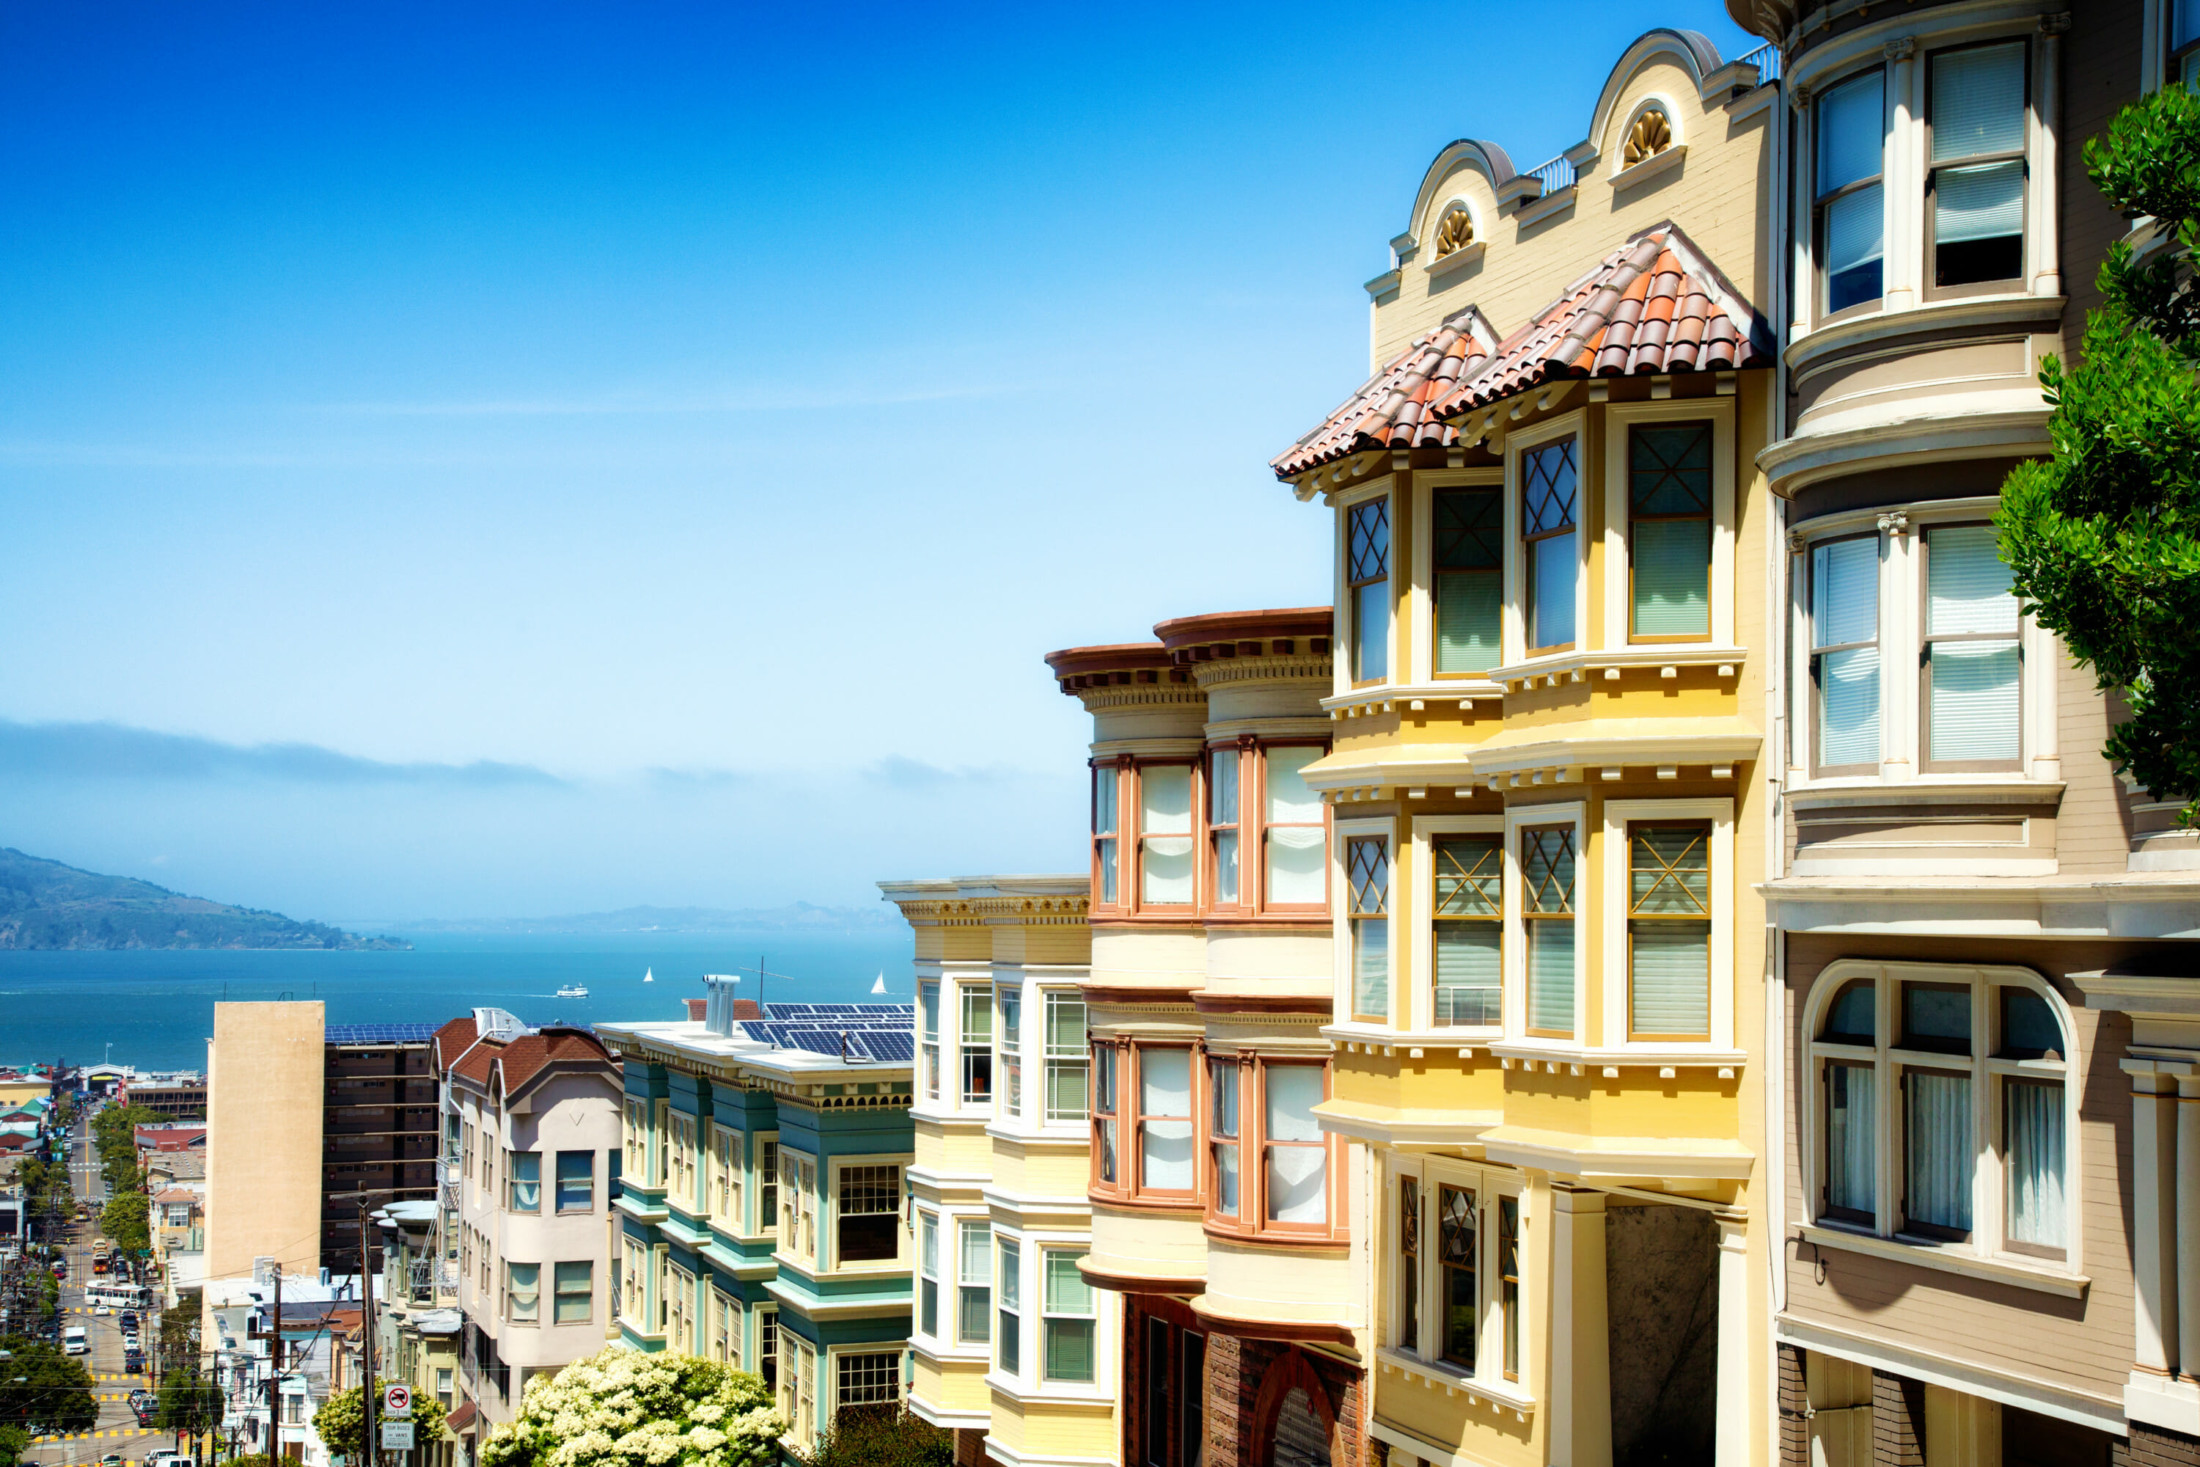 San Francisco, California | Advice for Property Managers in Primary Markets | Buildium